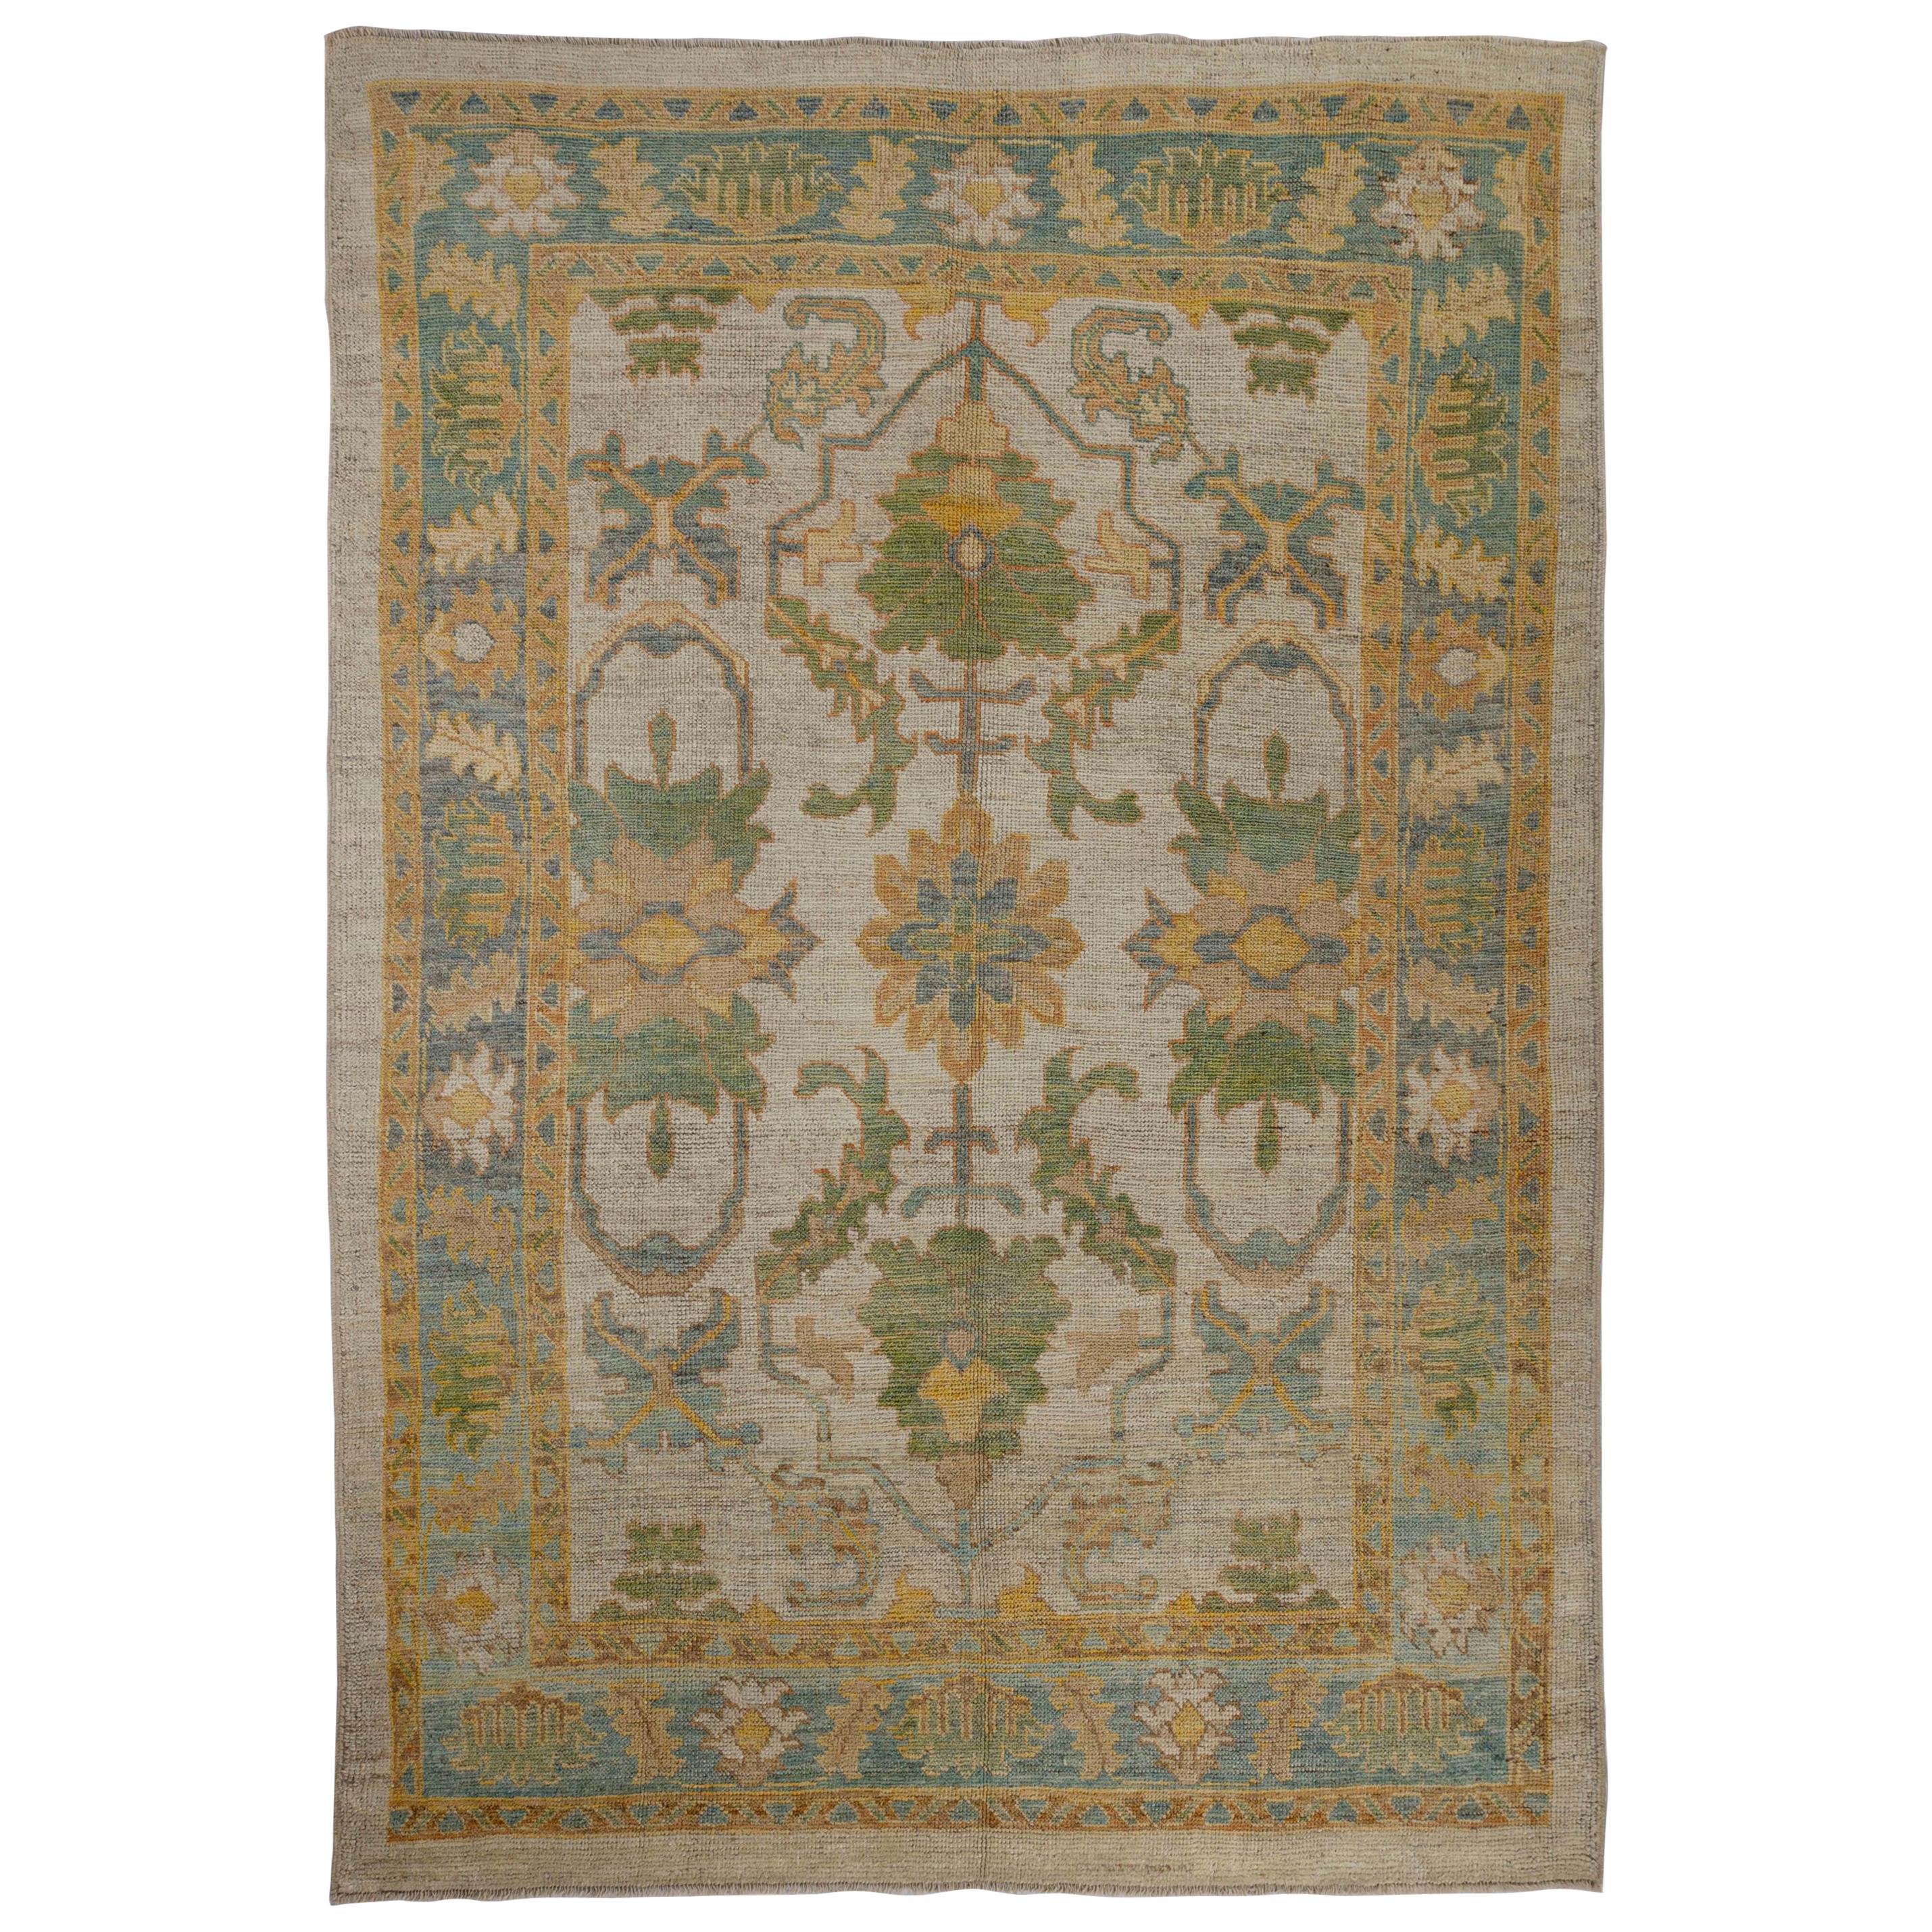 Contemporary Turkish Oushak Rug with Green and Blue Floral Patterns